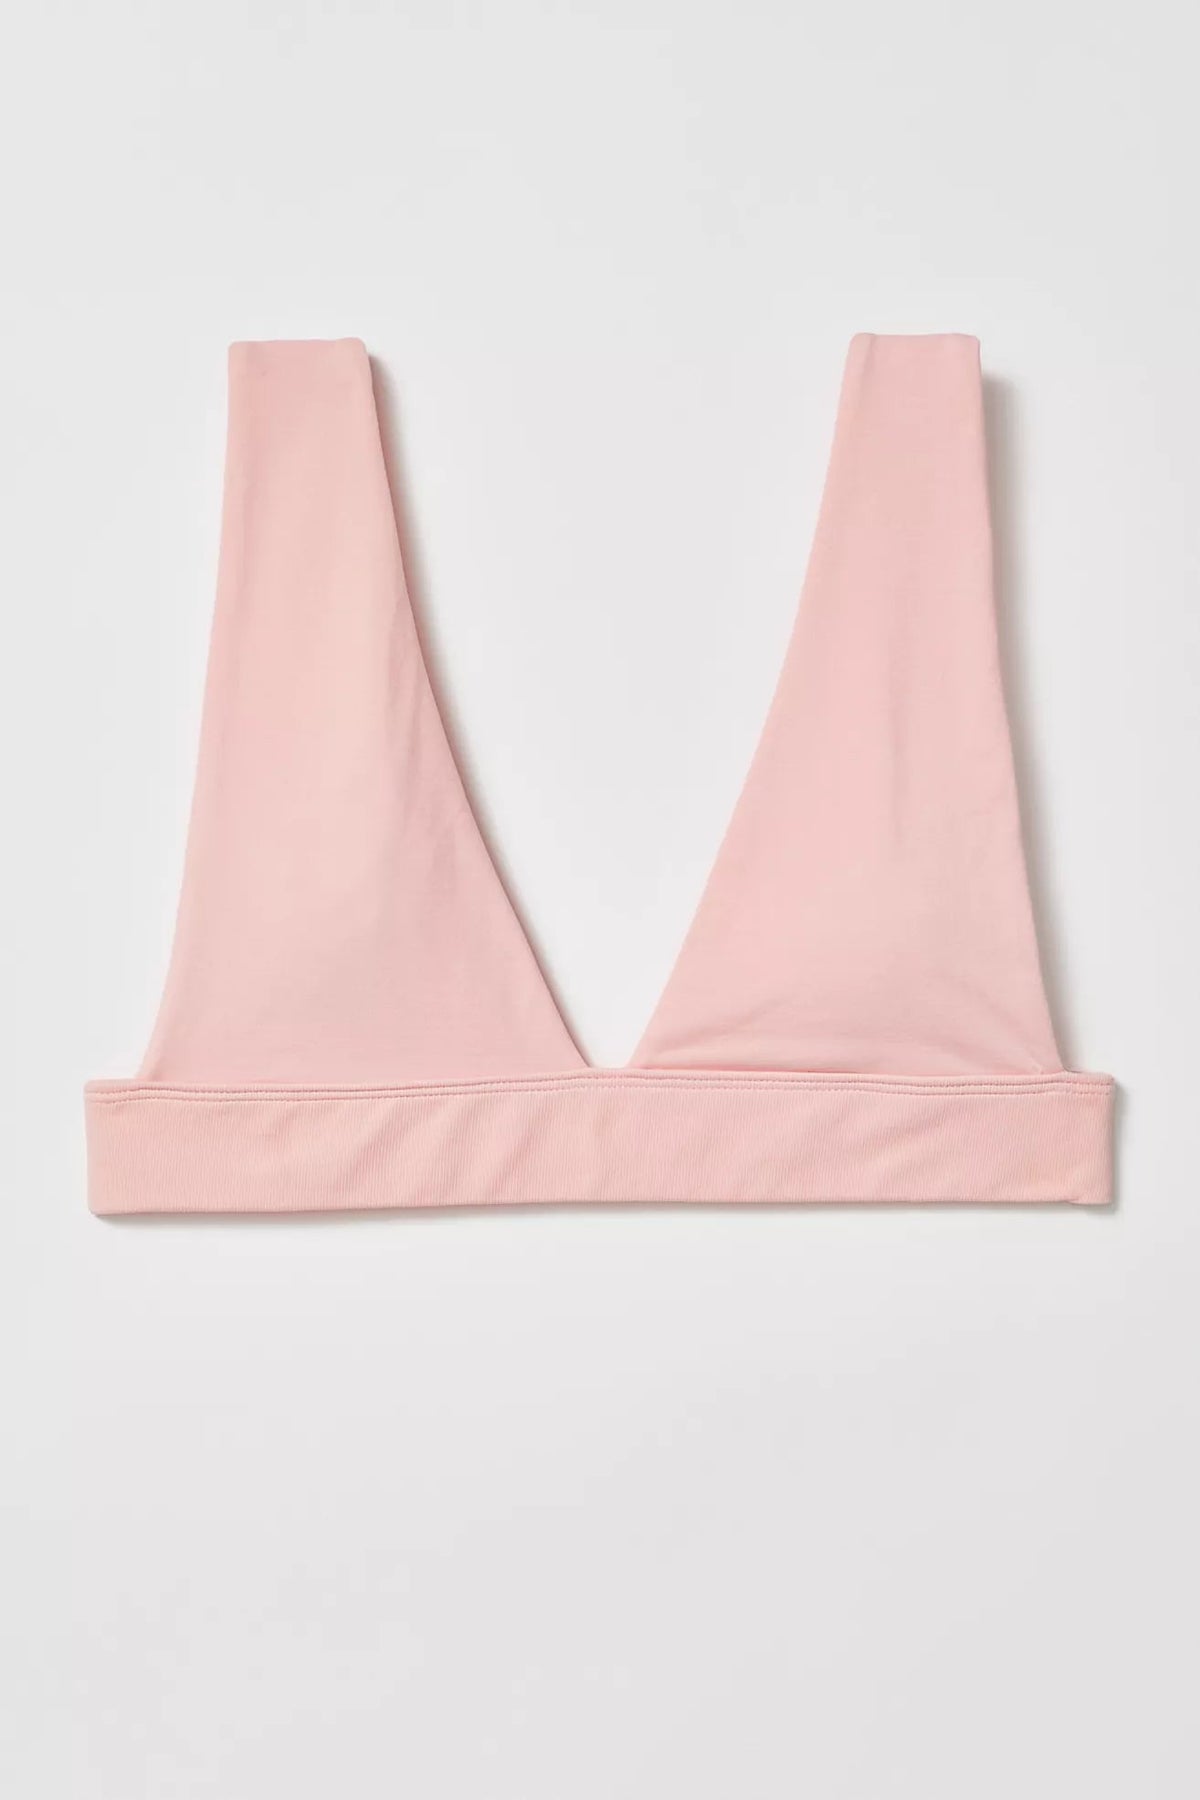 No Show Plunge Bralette by Intimately at Free People - ShopStyle Bras